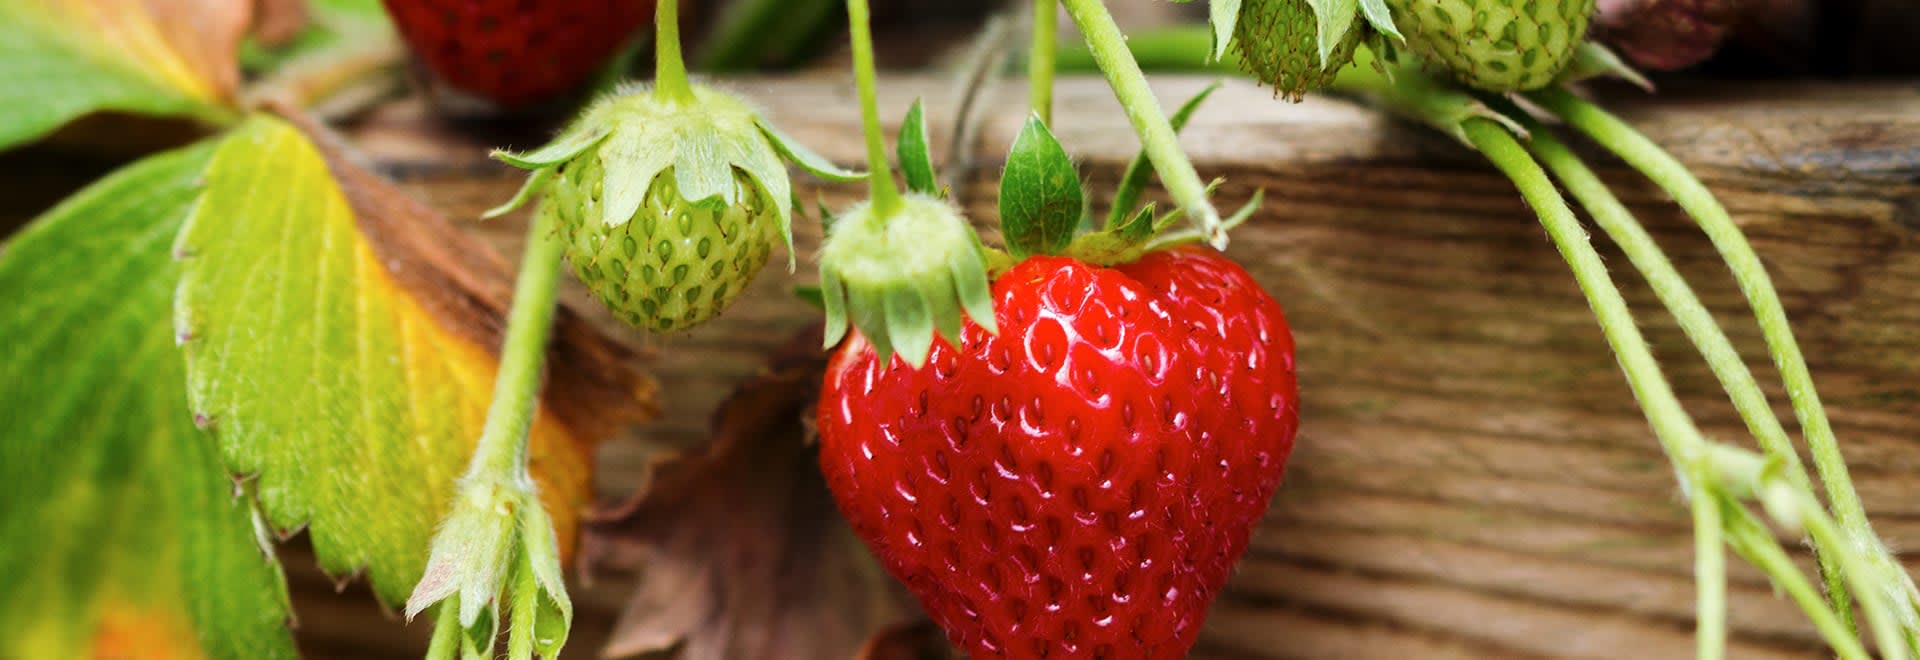 A close up photo of strawberries